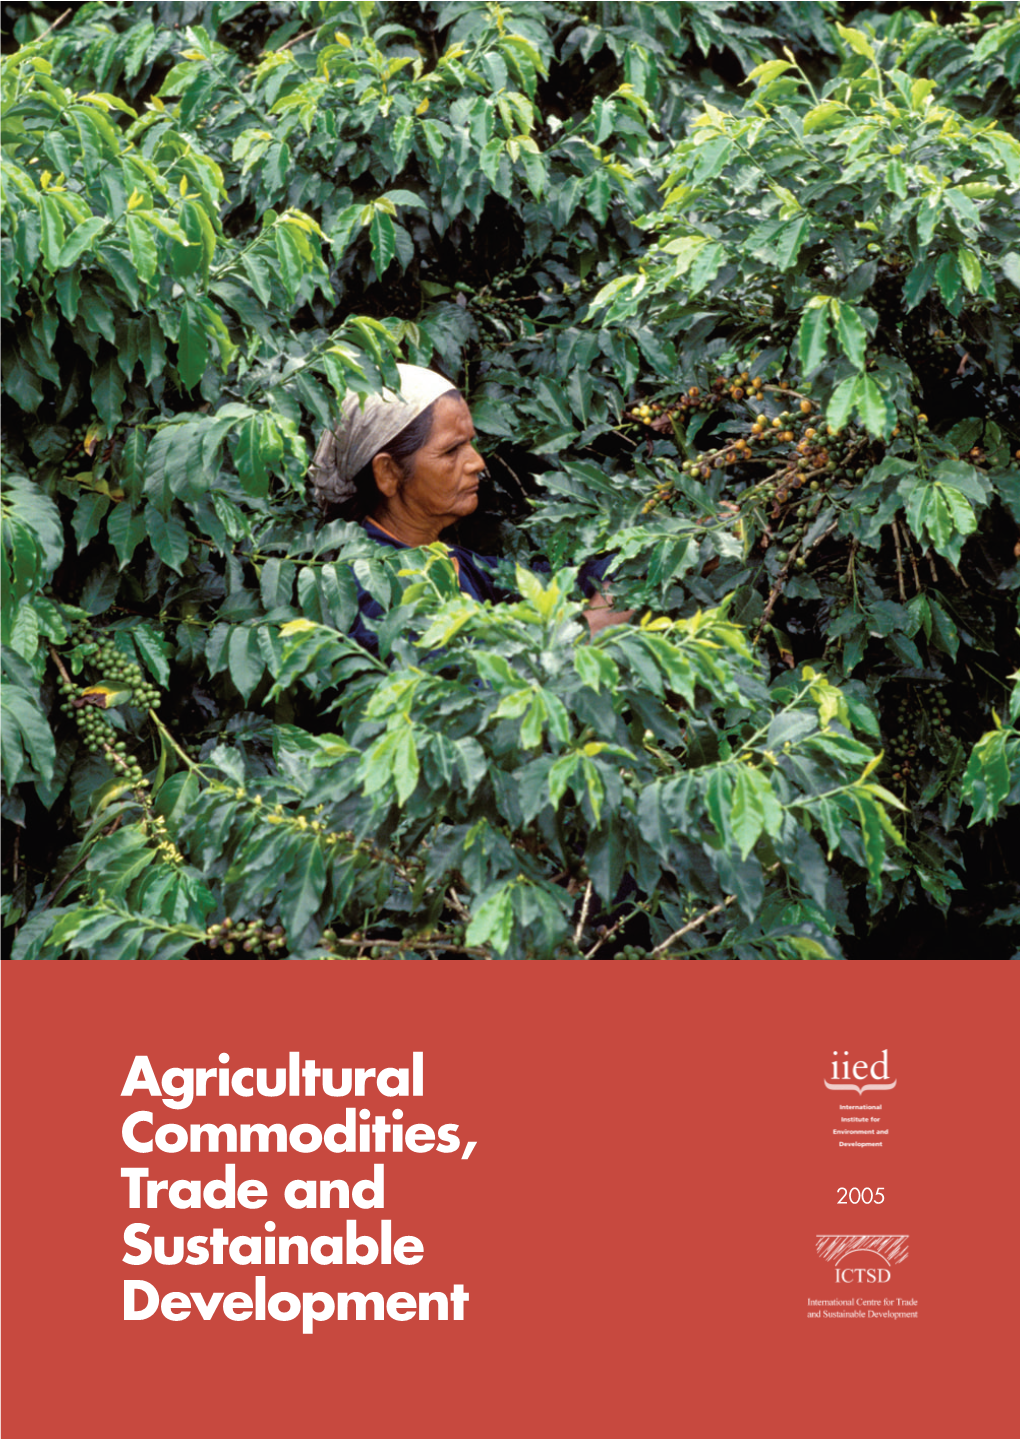 Agricultural Commodities, Trade and Sustainable Development